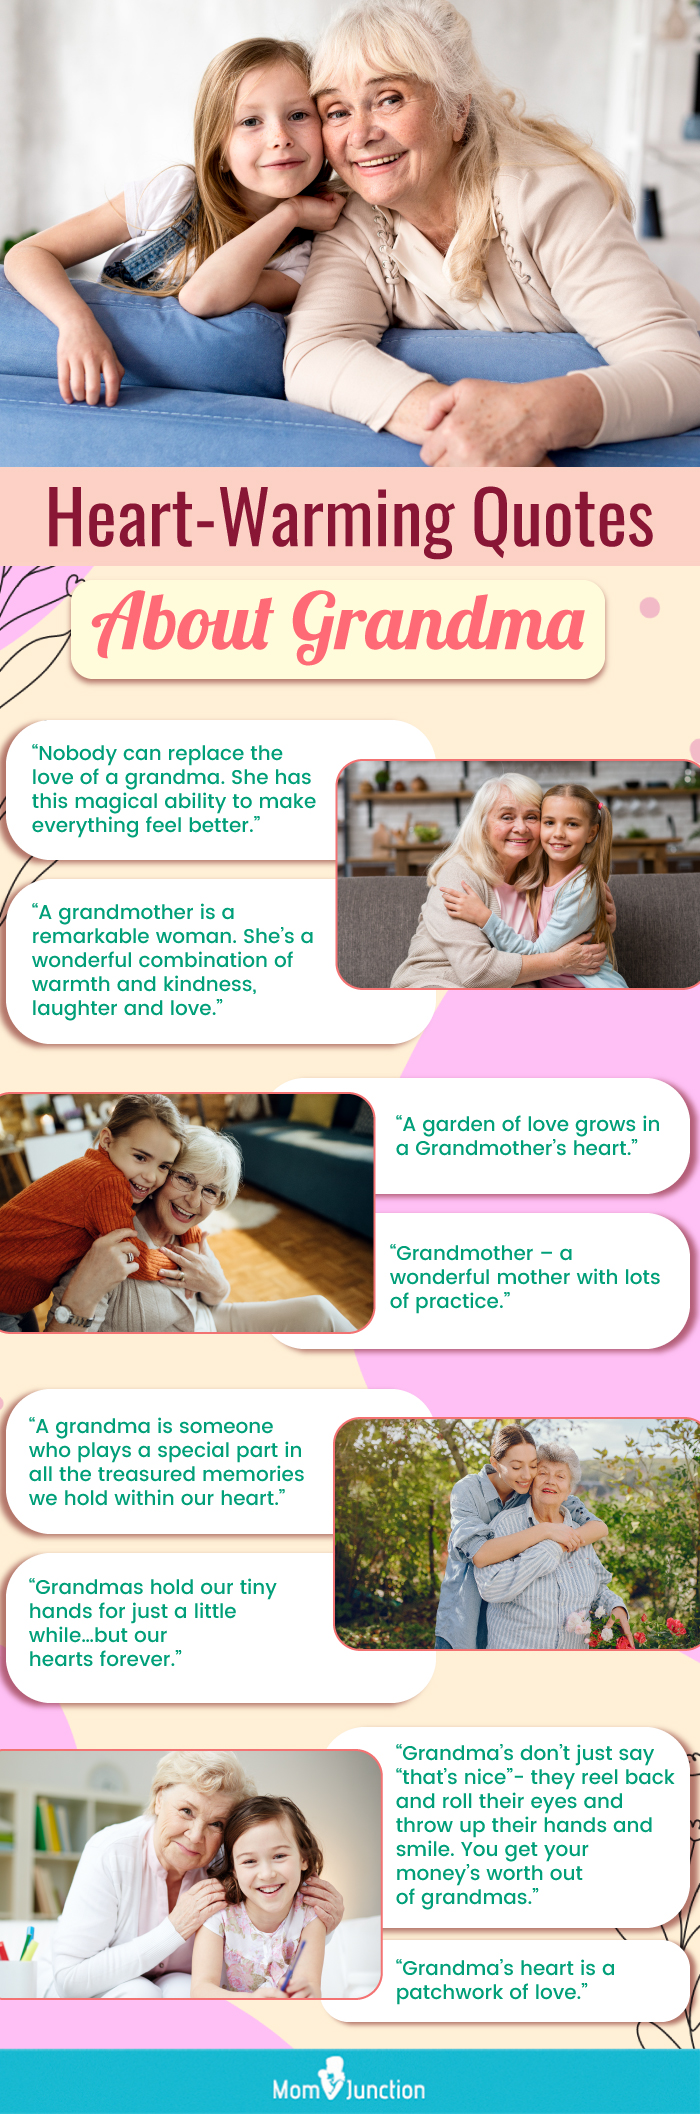 heart warming quotes about grandma (infographic)